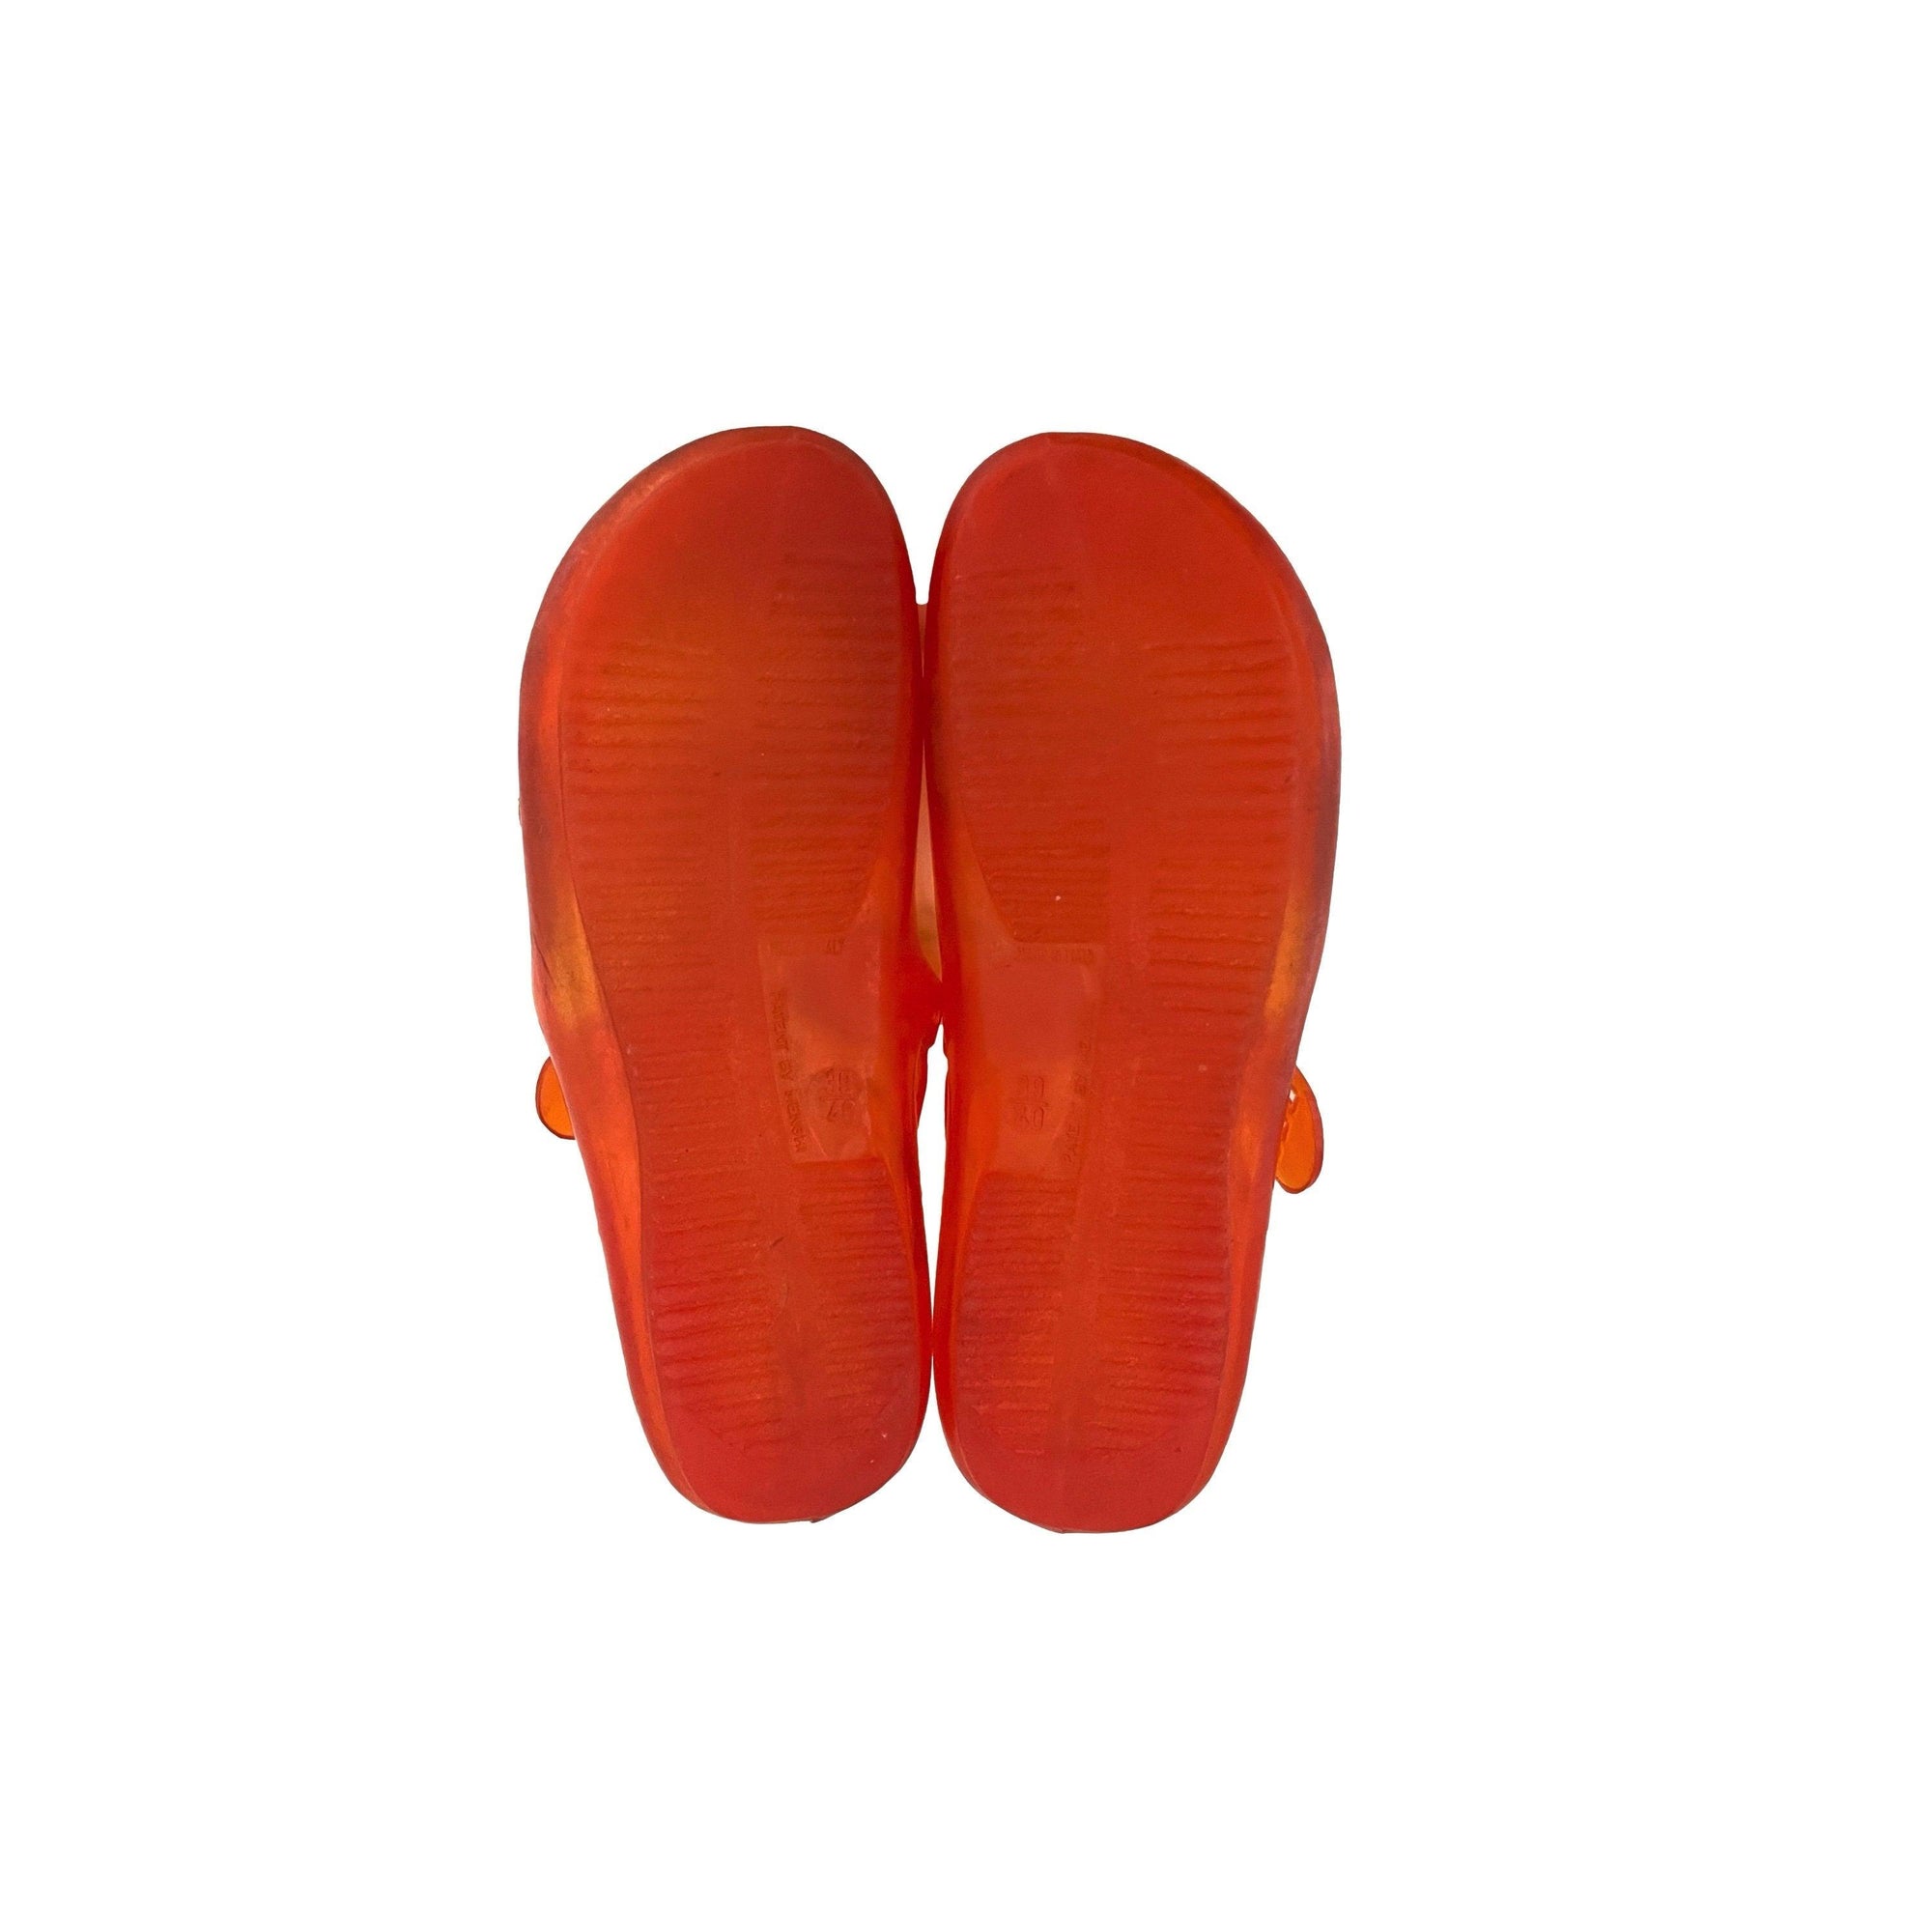 Pucci Orange Marmalade Jelly Shoes - Shoes